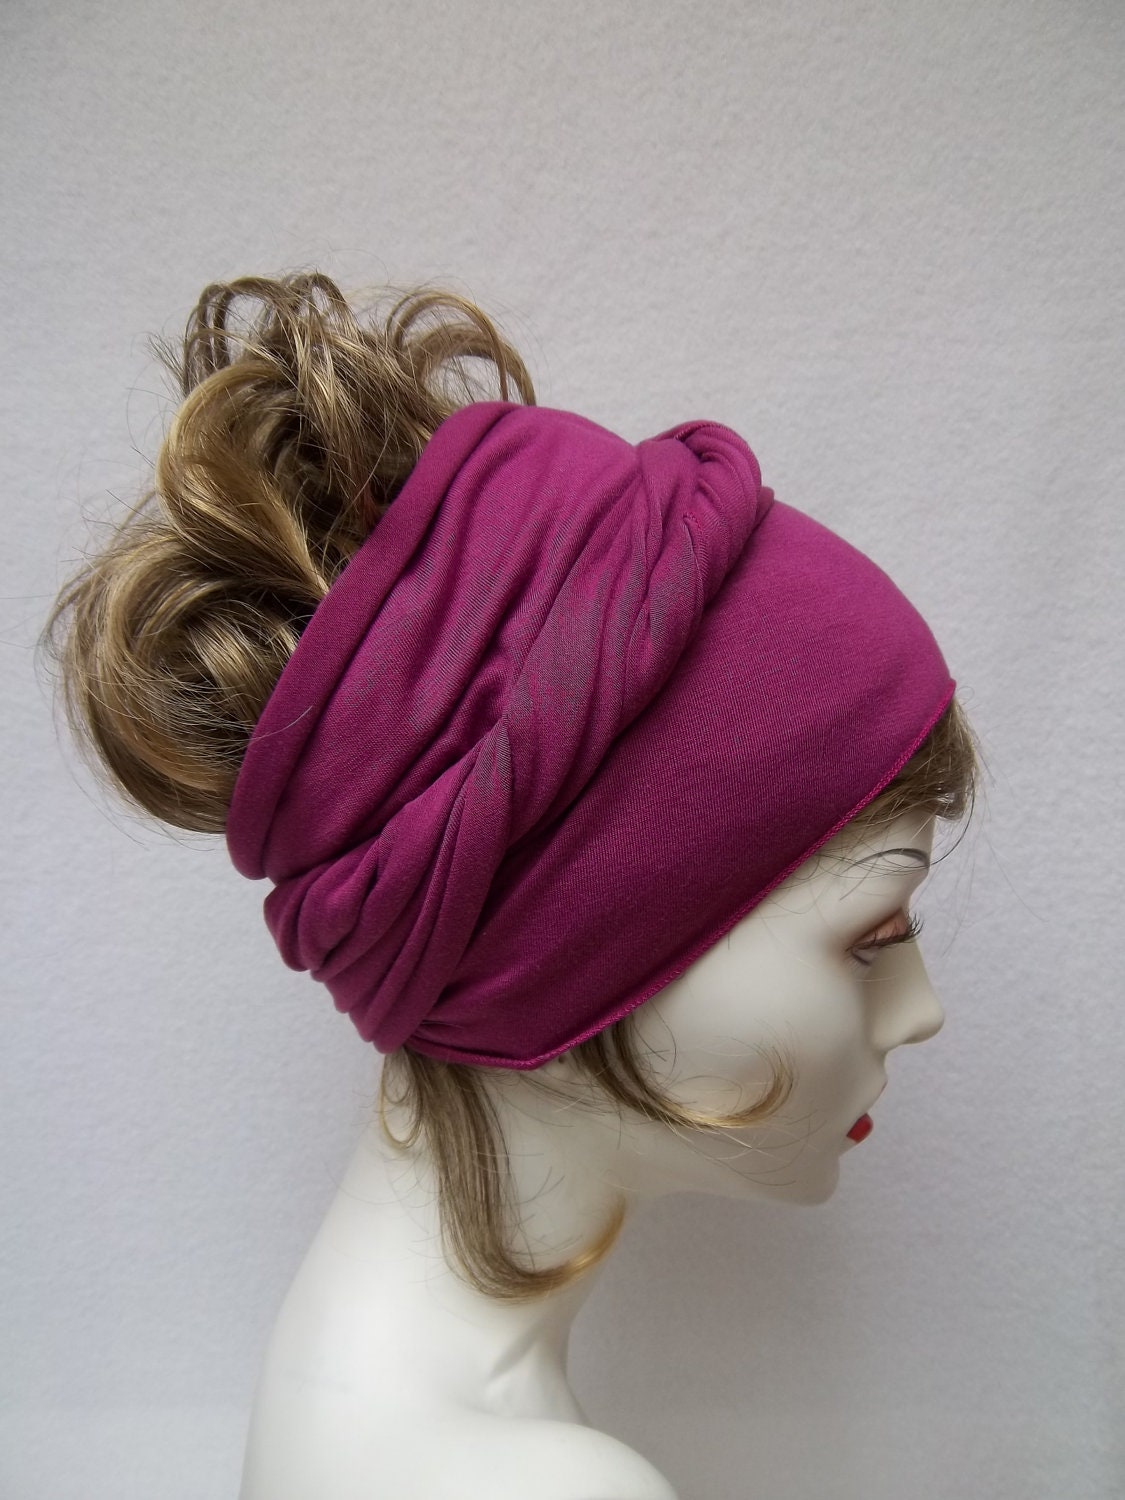 Yoga Hair Wrap Radiant Orchid Rayon Work Out Stretchy Ballerina  Exercise Headband - NinisNiche